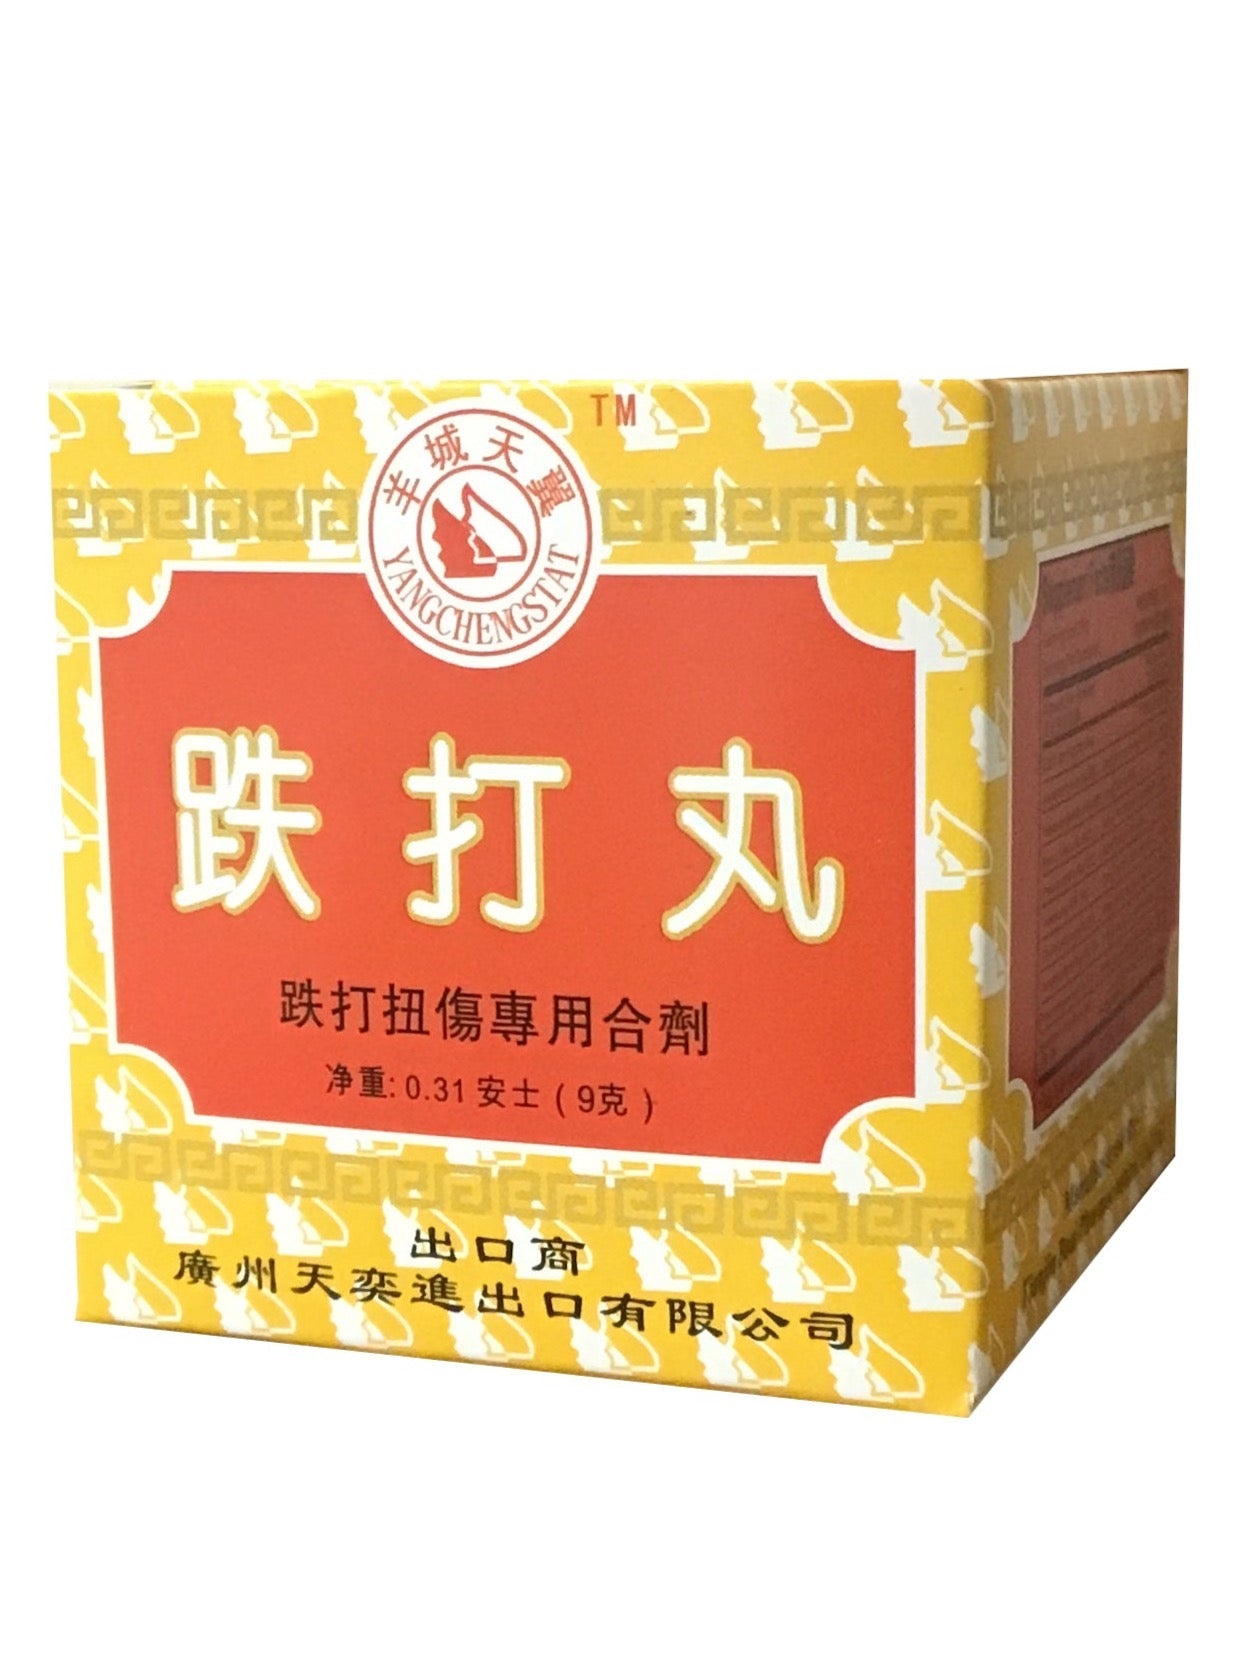 Tieh Ta Wan for Sprains Support (9g) 羊城天翼牌 跌打丸 (9克)